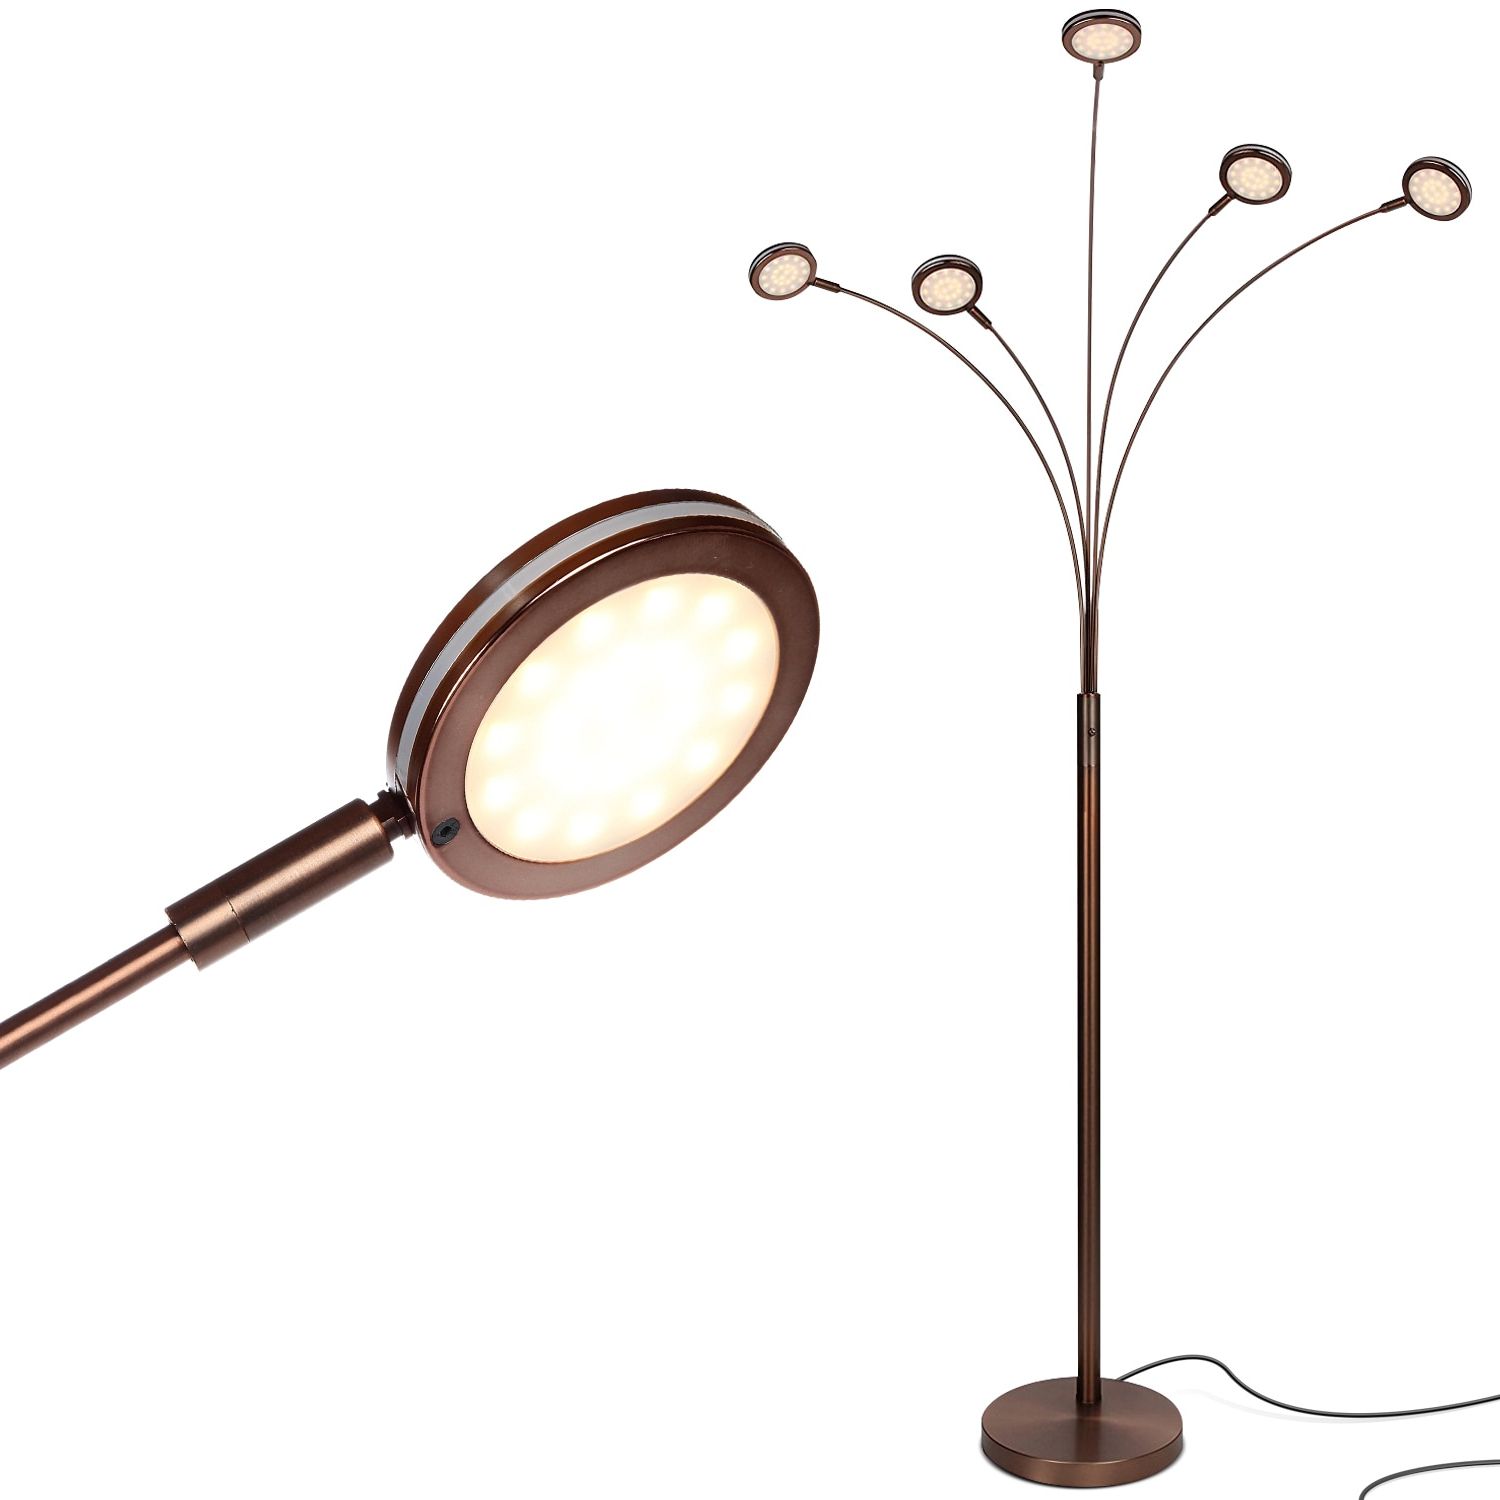 2019 Brightech 74 In Oil Brushed Bronze Multi Head Floor Lamp In The Floor Lamps  Department At Lowes With Regard To 74 Inch Standing Lamps (View 9 of 10)